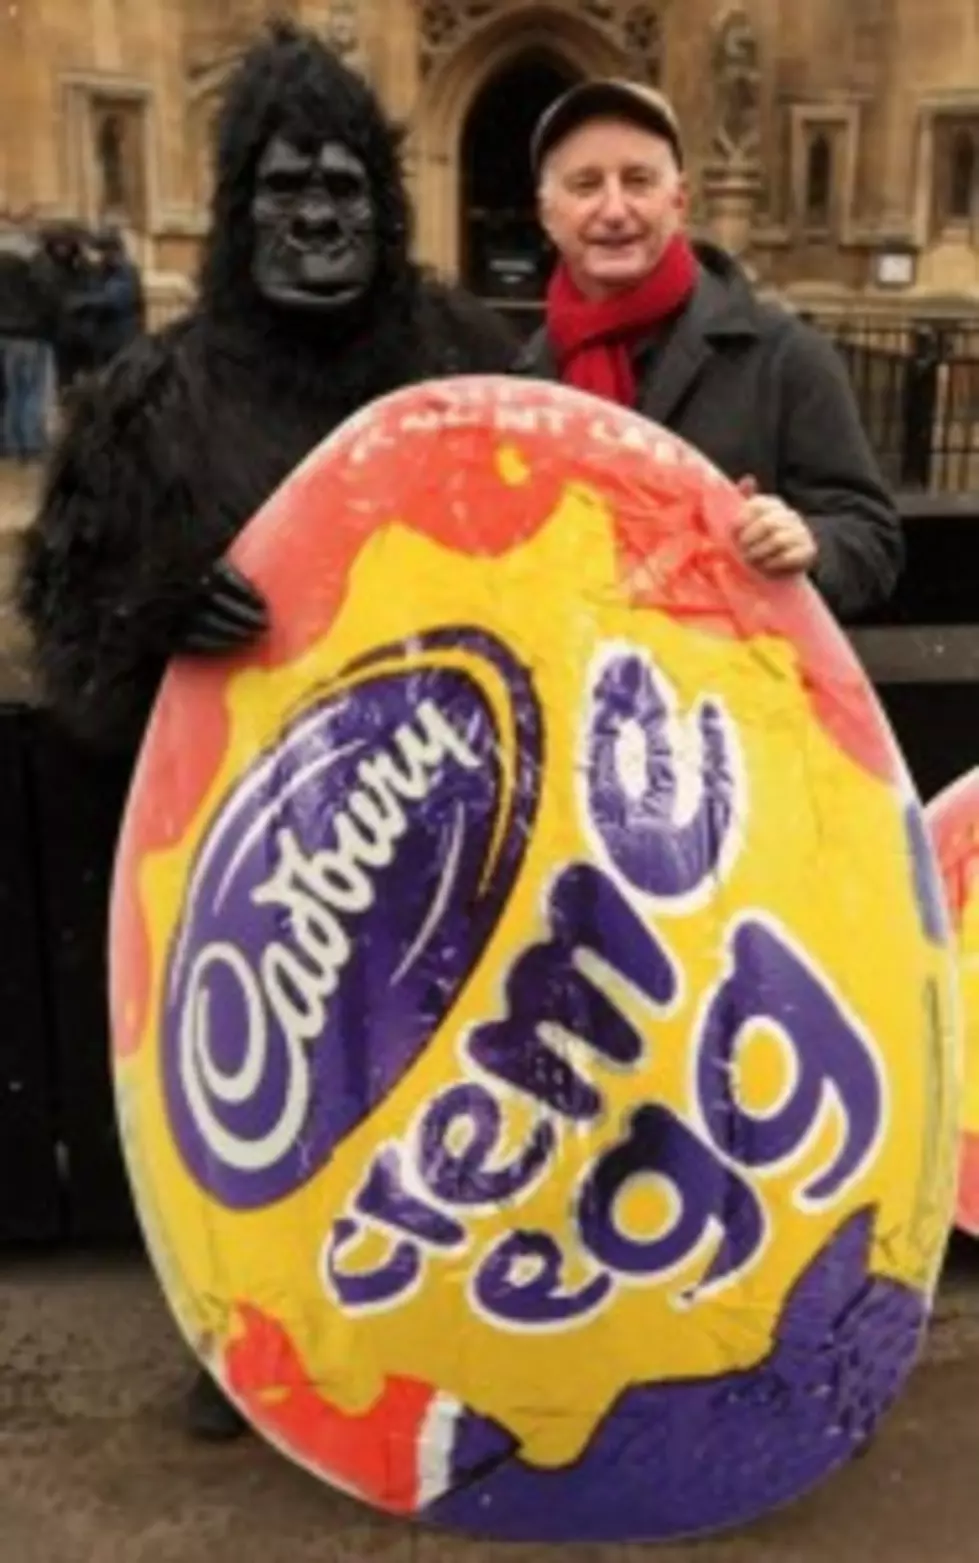 How Badly Do You Want To Try a Deep-Fried Cadbury Egg?